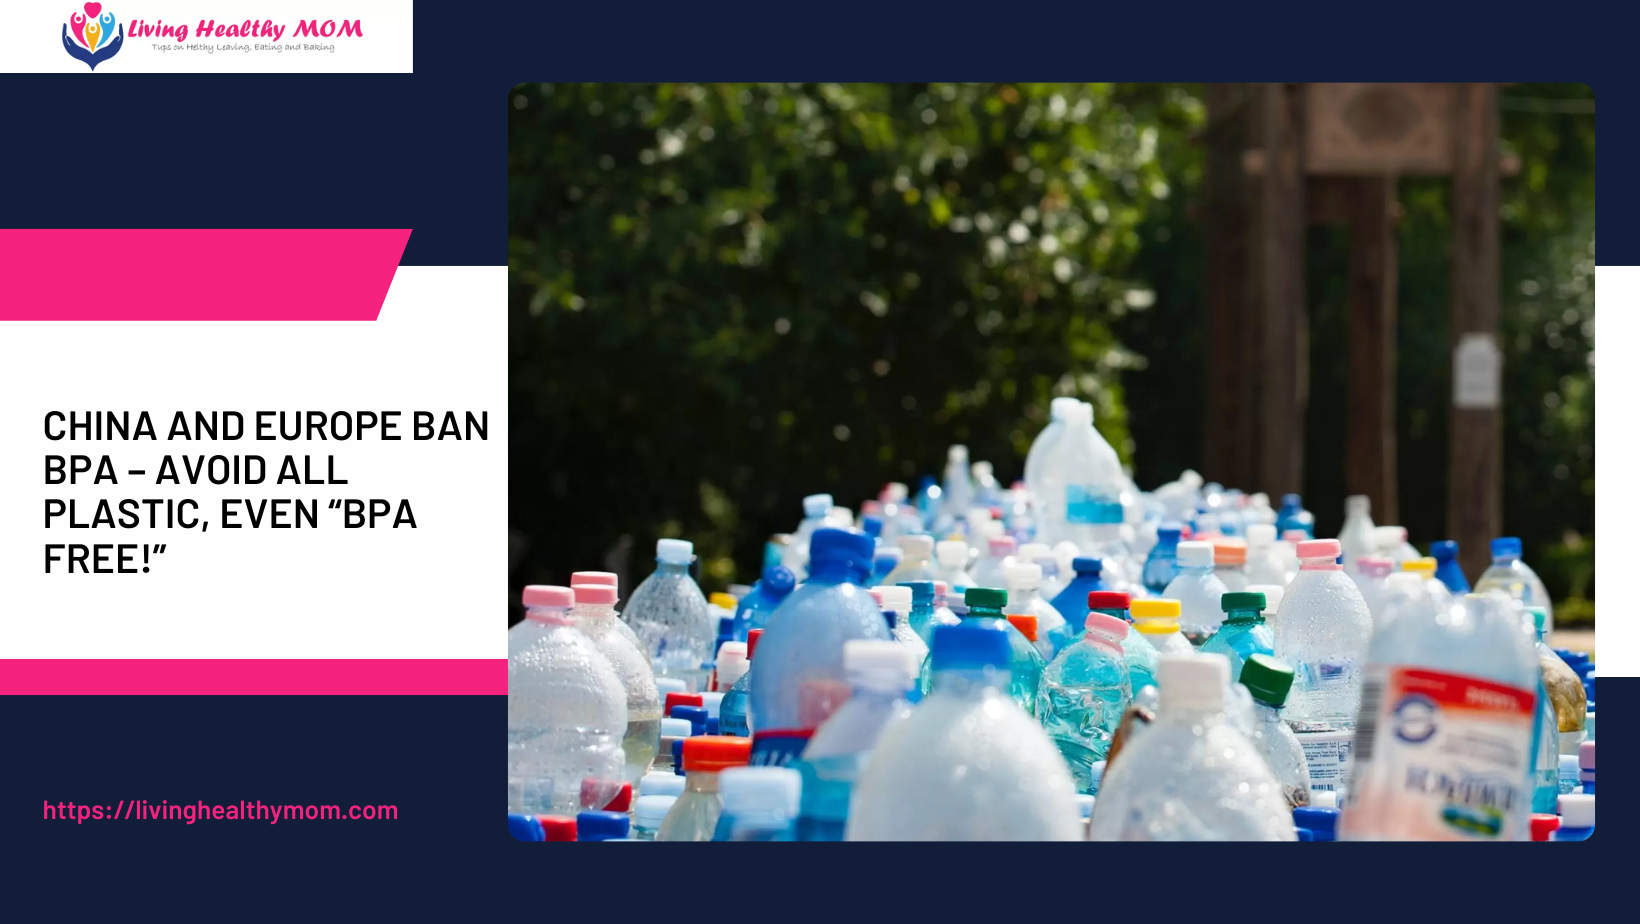 China and Europe Ban BPA – Avoid All Plastic, Even “BPA Free!”